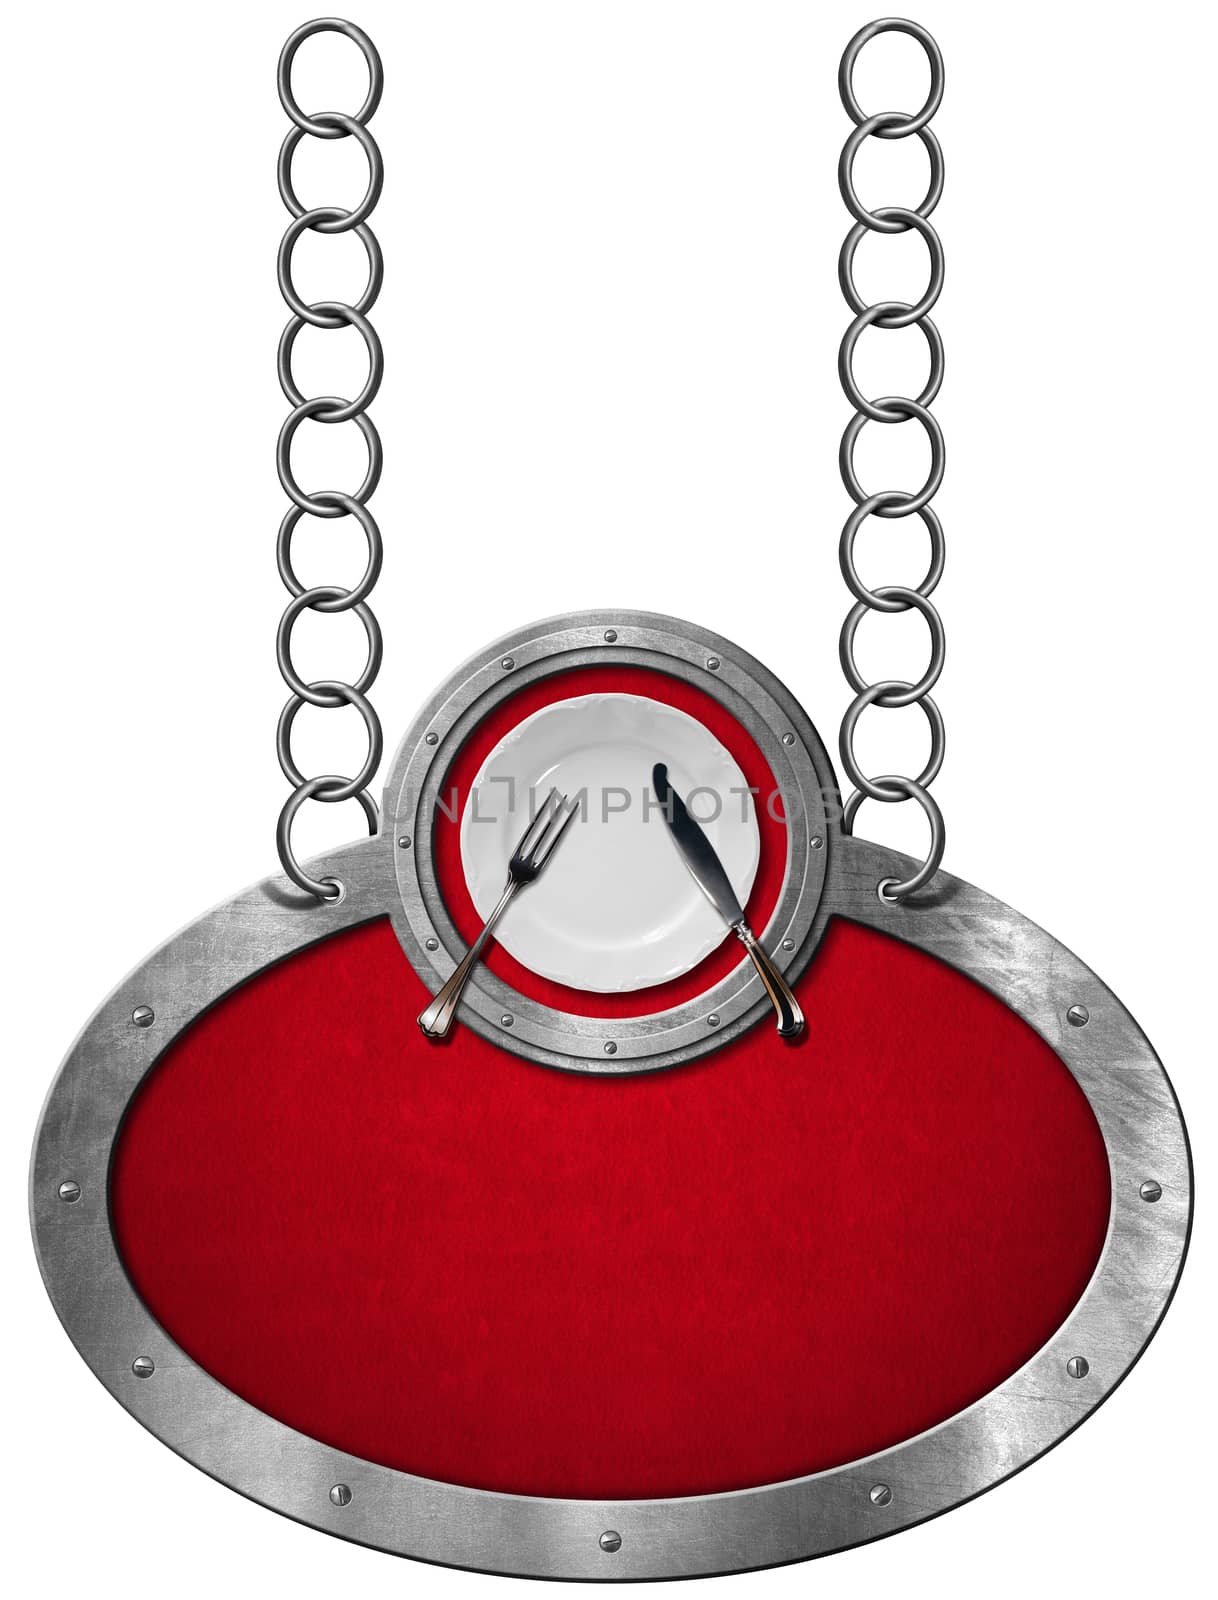 Oval metallic sign with red velvet and frame, white empty plate with silver cutlery. Hanging from a metal chain and isolated on a white